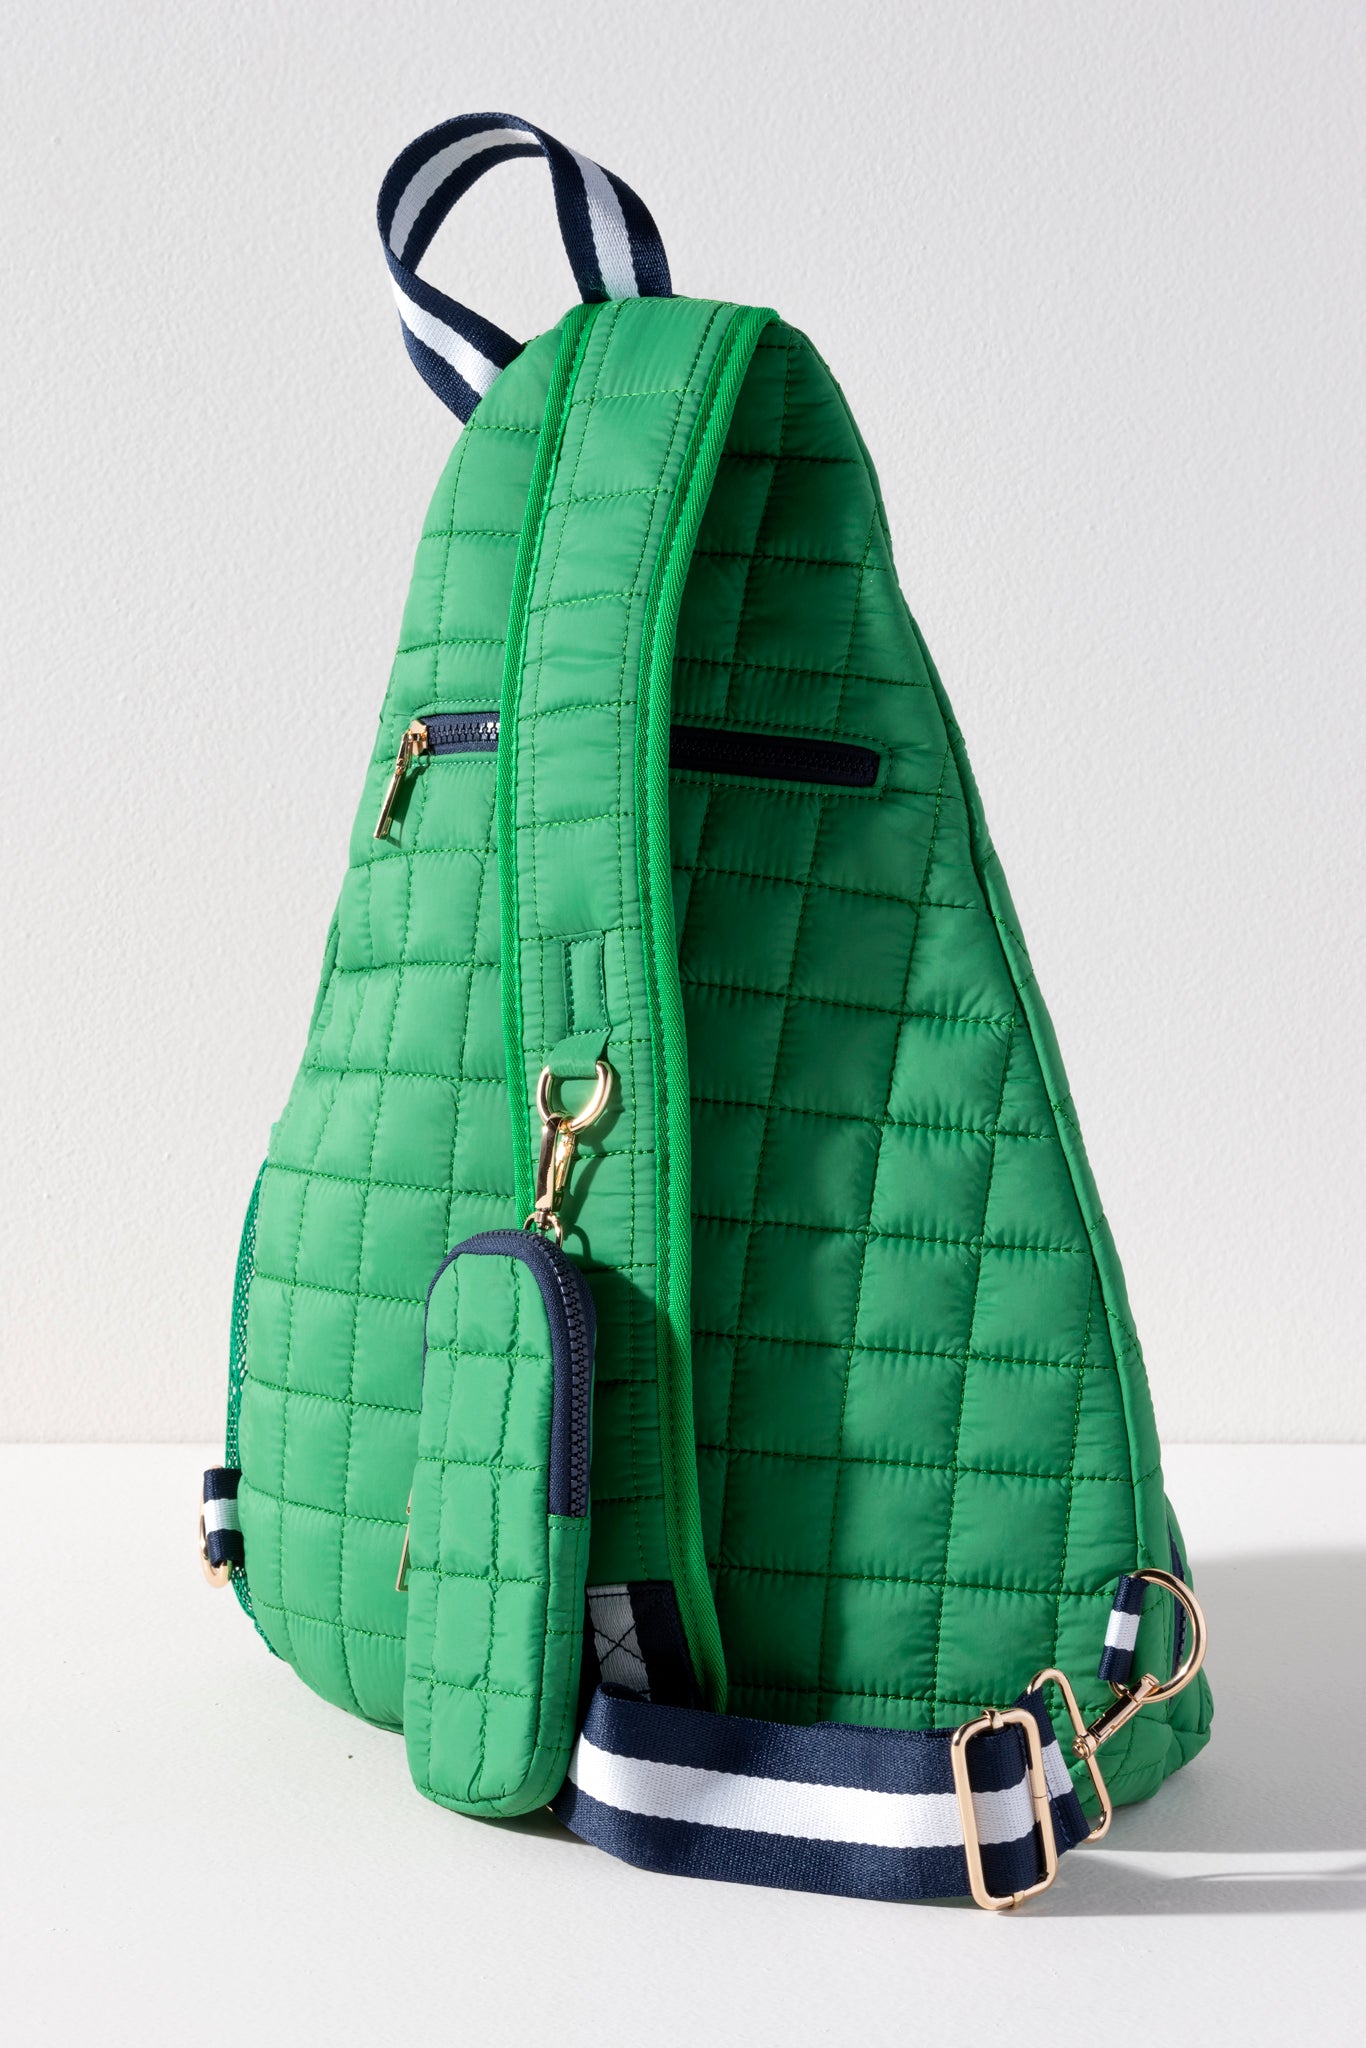 Kelly green quilted nylon tennis and pickleball sling backpack with navy zippers and navy white striped strap